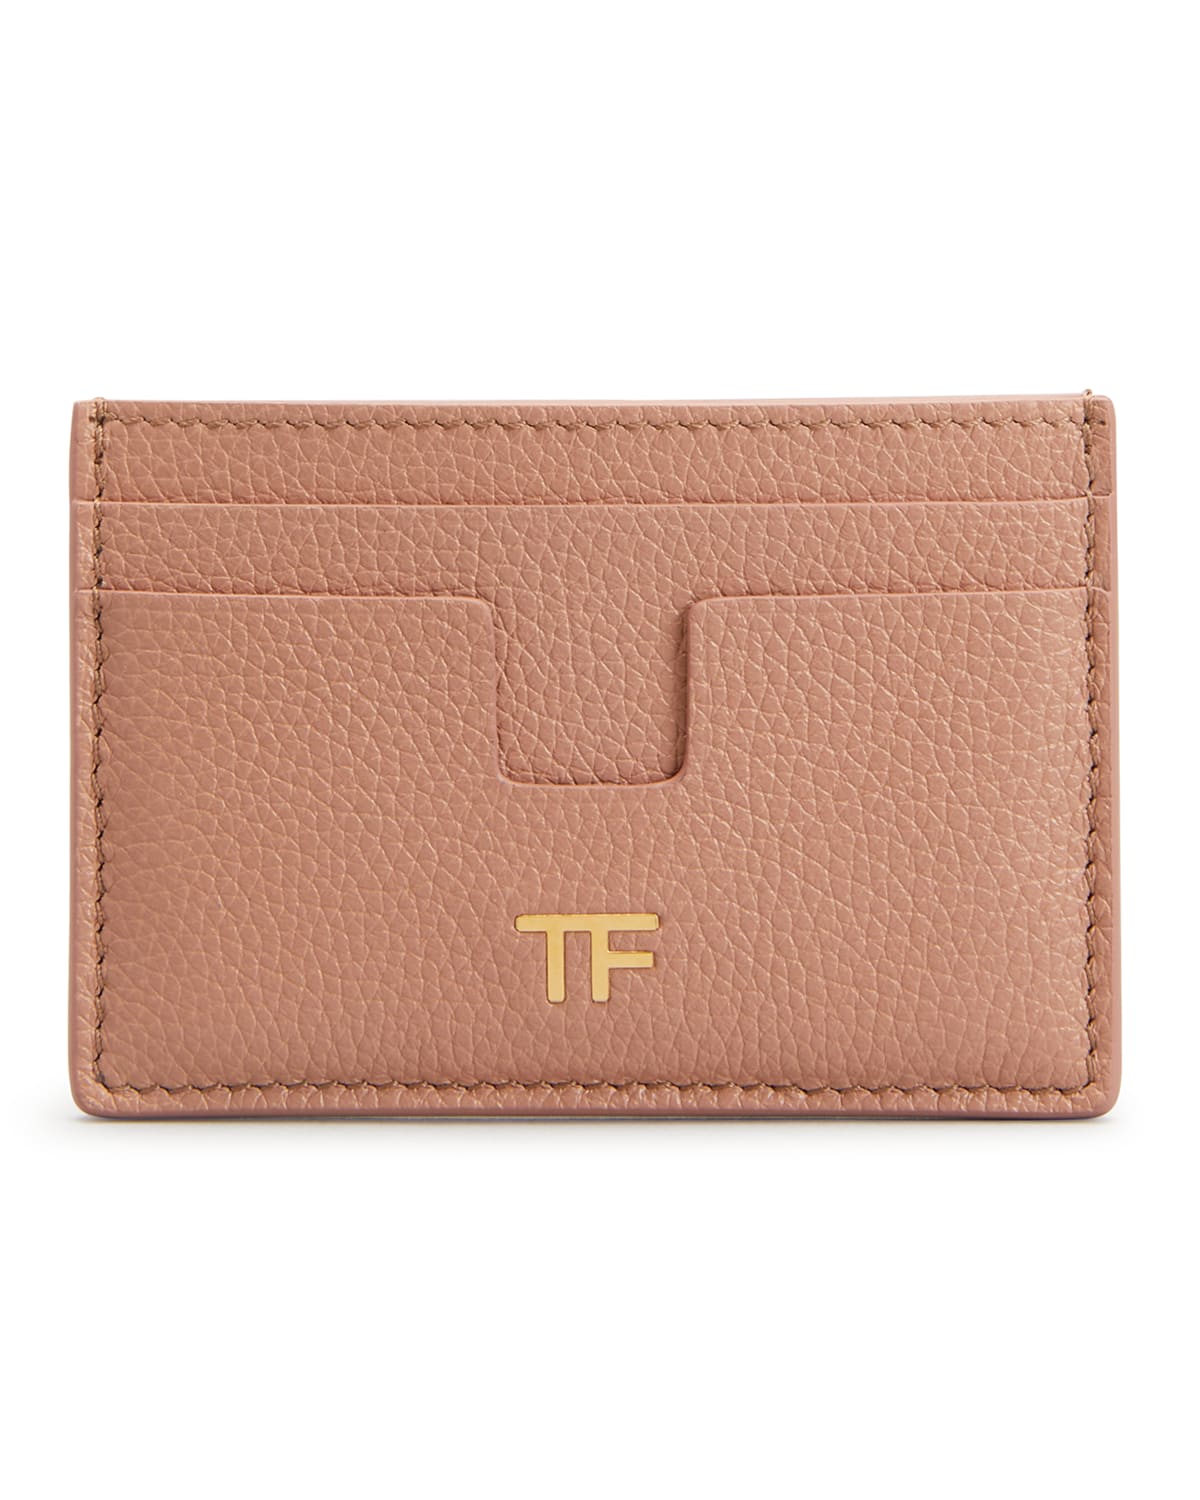 Tom Ford Classic Tf Leather Card Case